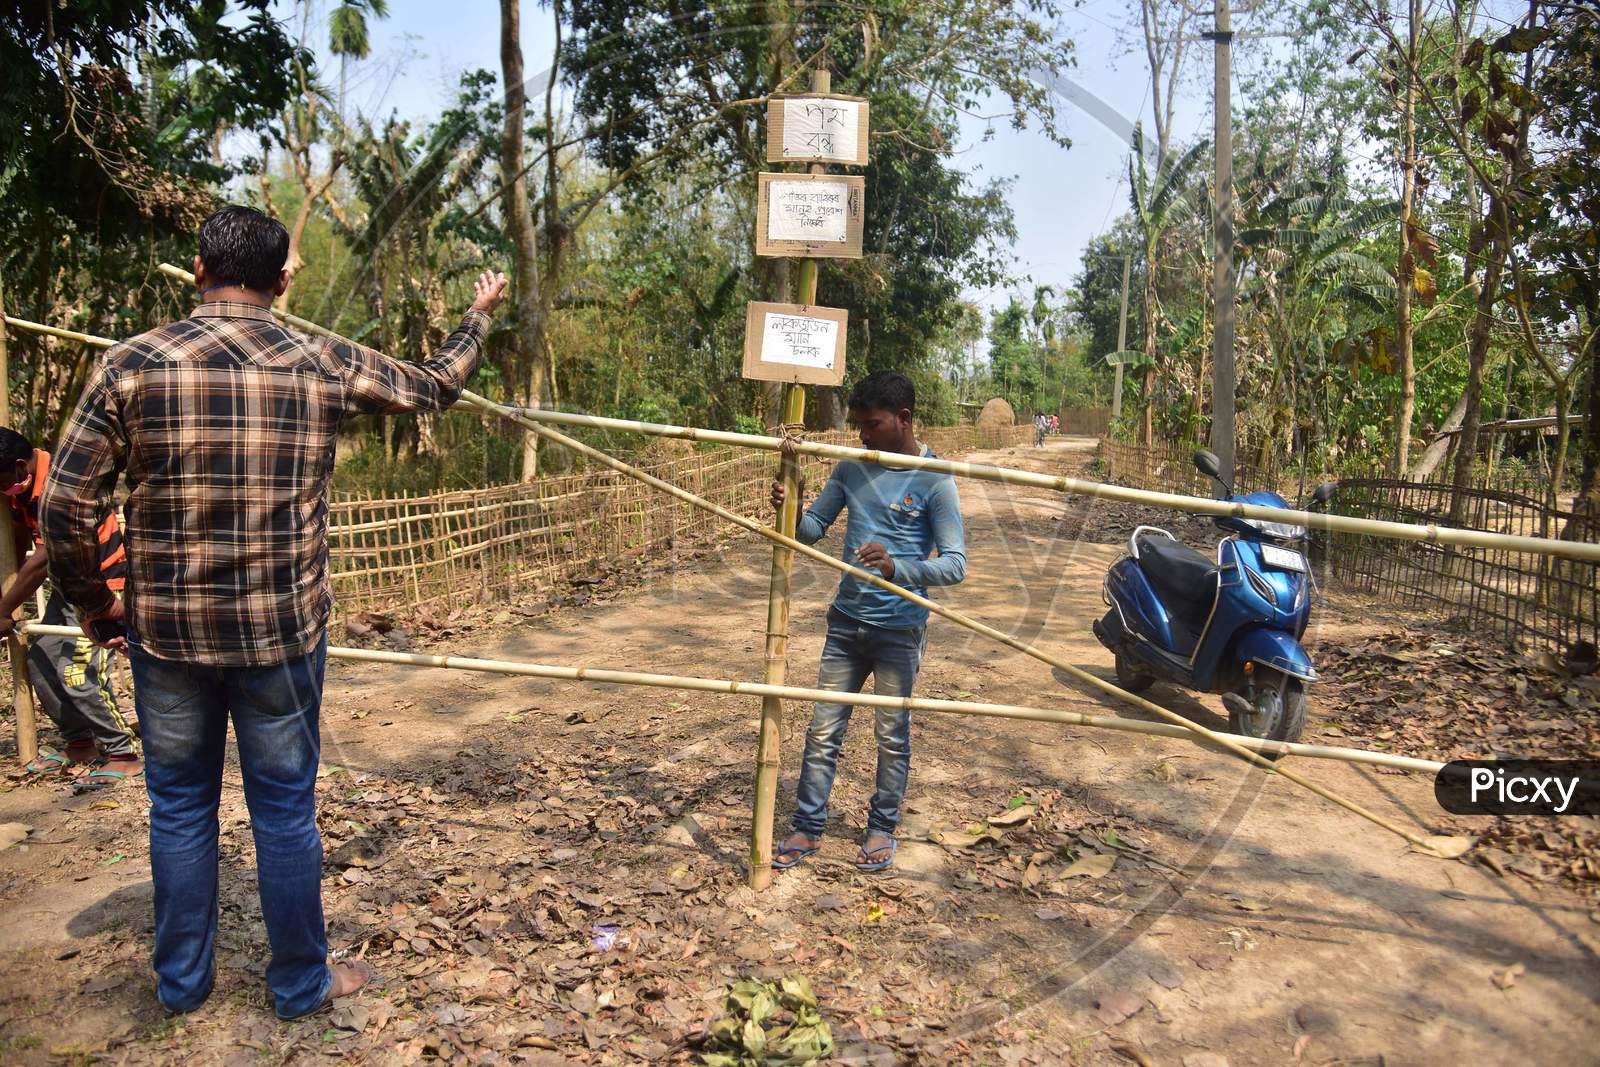 Barricade Made Of Bamboo Is Laid Across A Road By Residents During A 21-Day Nationwide Lockdown To Limit The Spreading Of Coronavirus Disease (Covid-19), At A Village In Nagaon District Of Assam